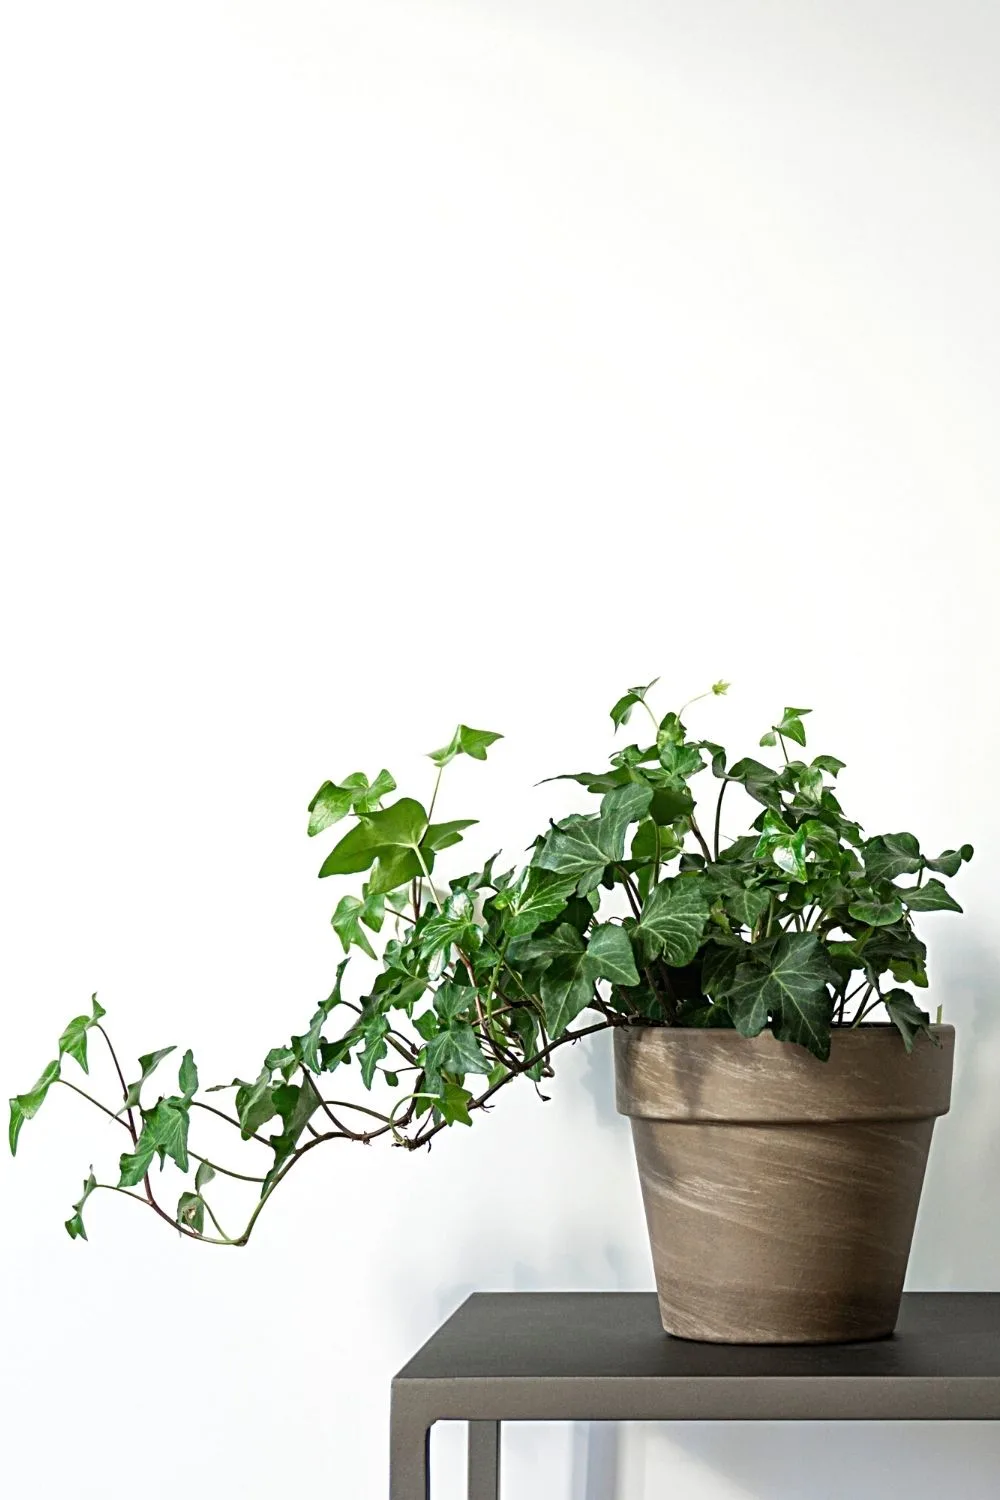 English Ivy can tolerate low-light level areas like northwest-facing windows